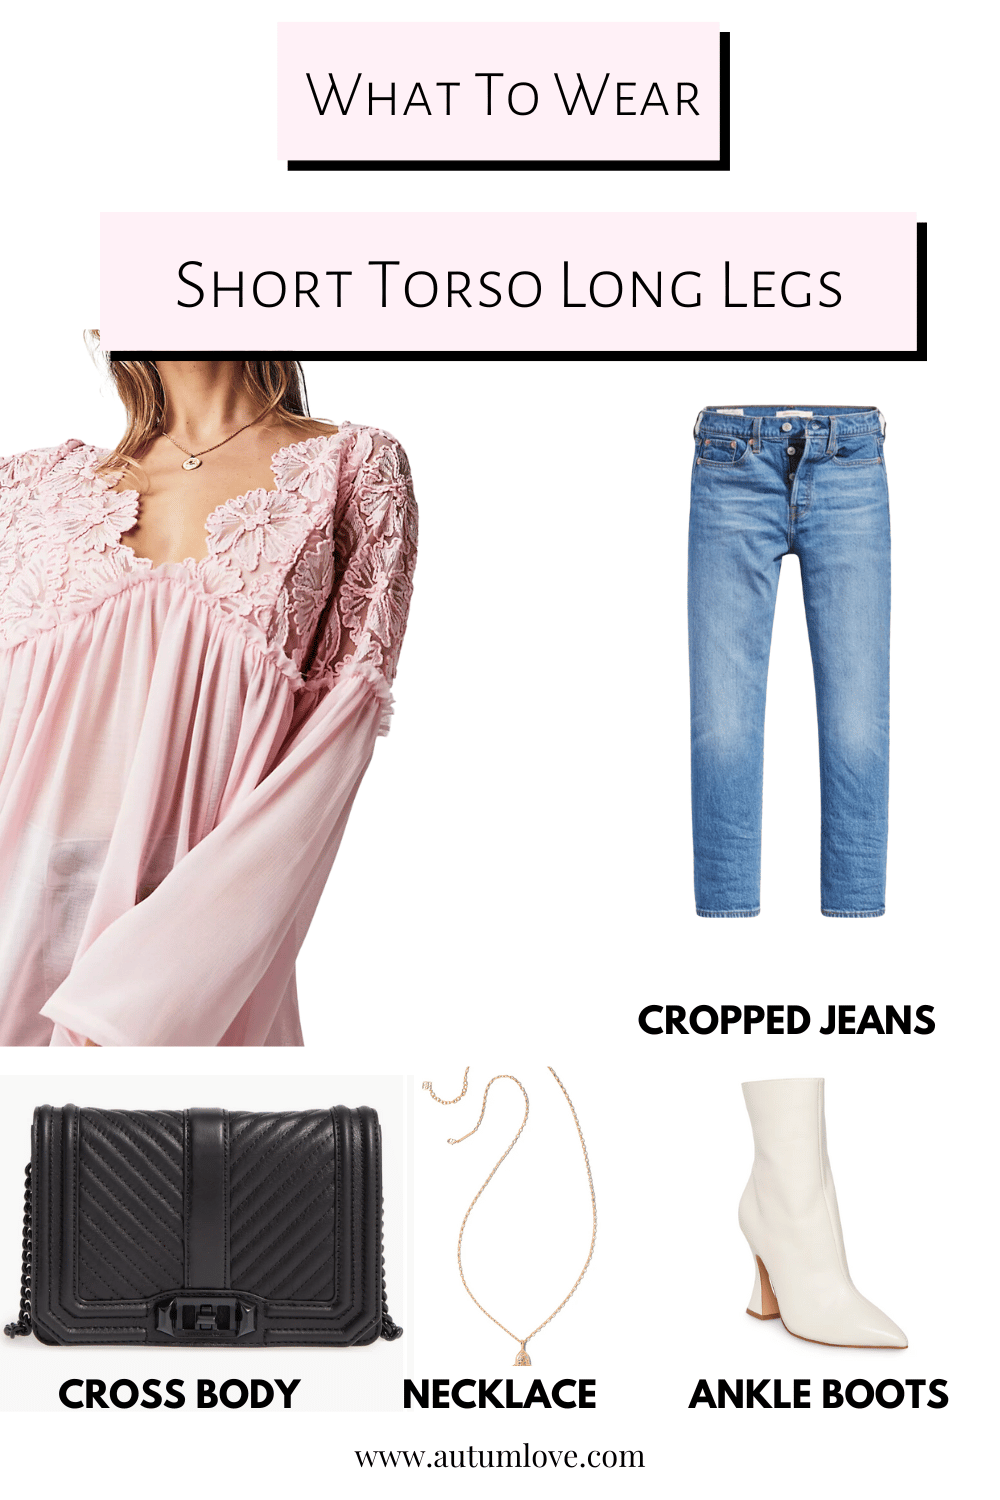 How To Dress If You Have Long Legs And Short Torso